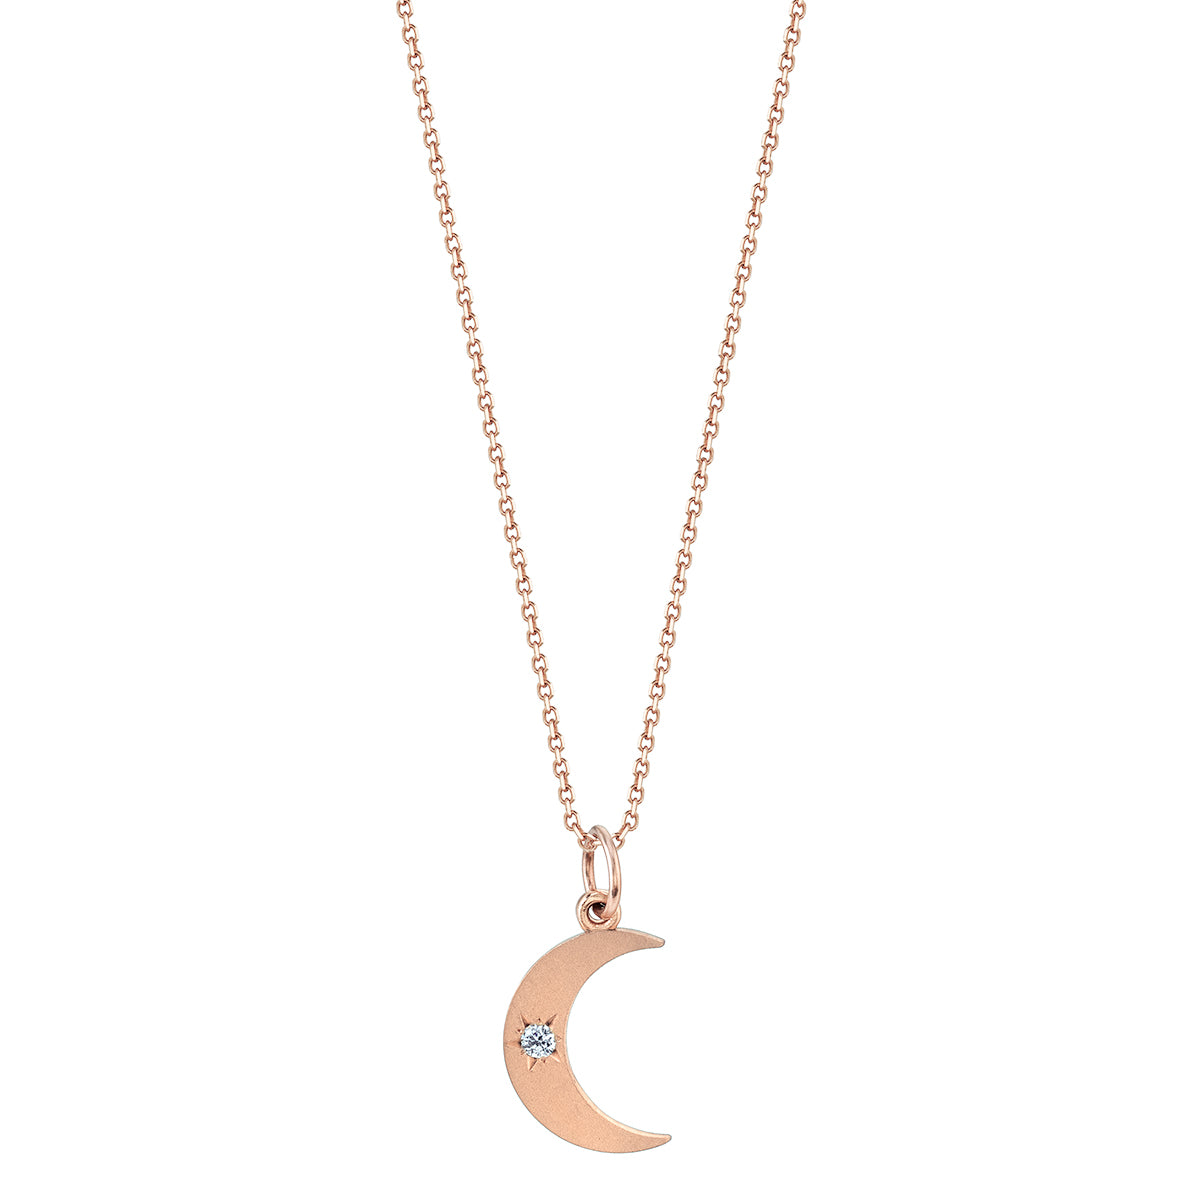 Crescent Moon with Medallion Layering Necklace Set in Gold – Samanca Jewelry